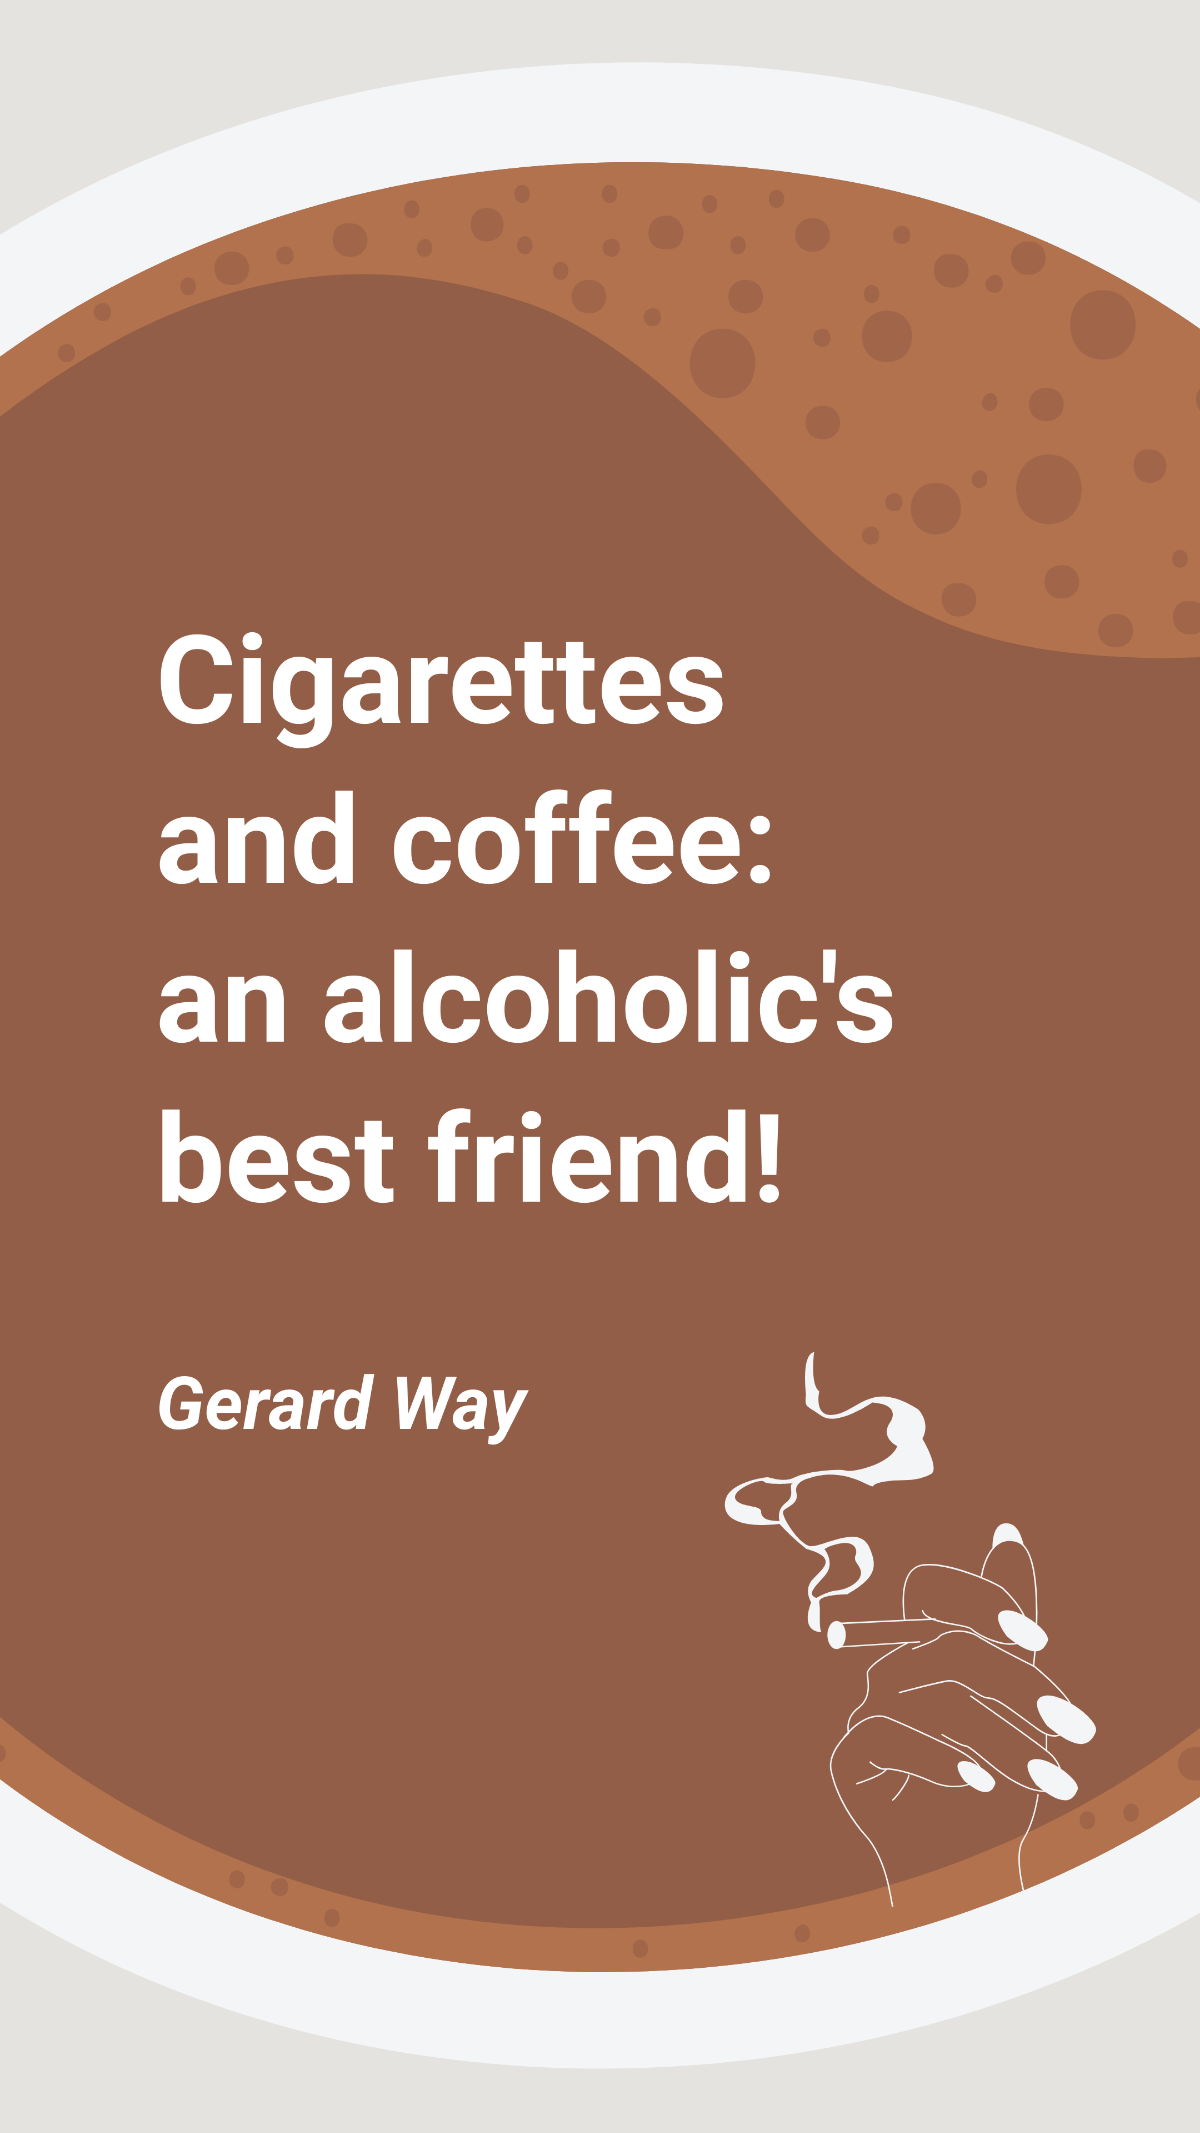 Gerard Way - Cigarettes and coffee: an alcoholic's best friend! Template